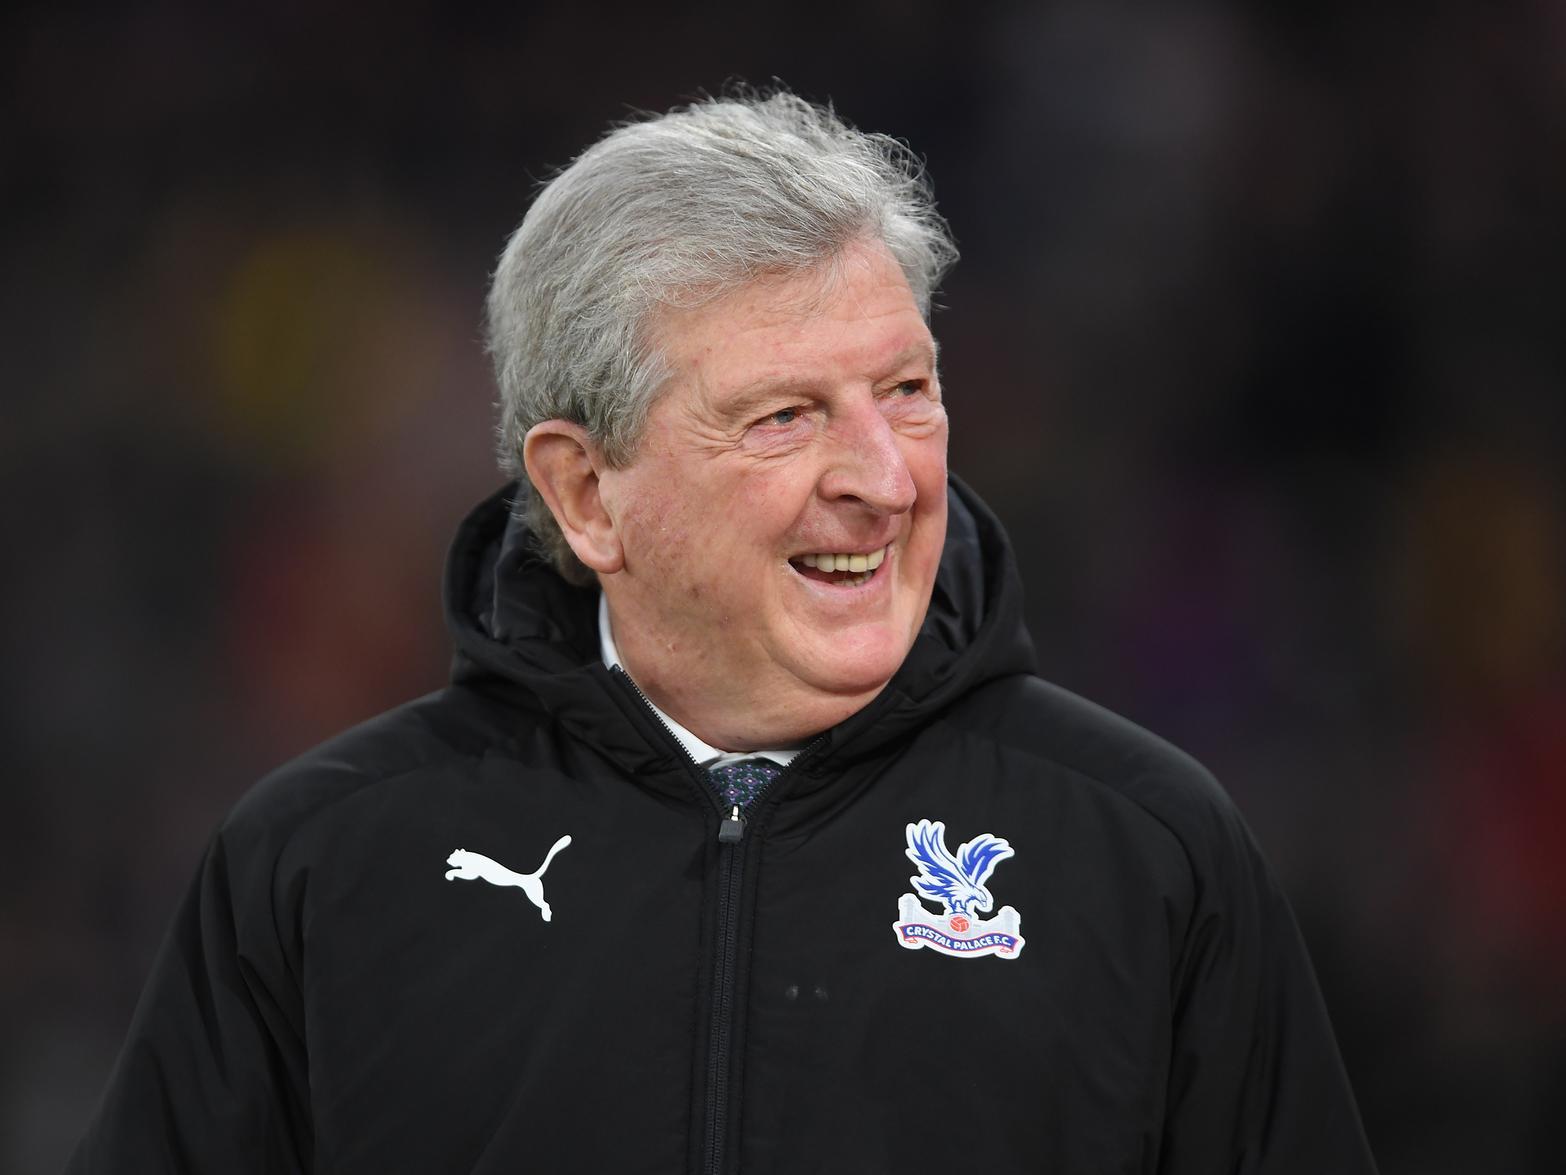 Roy Hodgson will be without right-back Joel Ward (knee) until January, while Gary Cahill is a doubt. That news will certainly give Sean Dyche a boost as his side prepare to take on Crystal Palace.